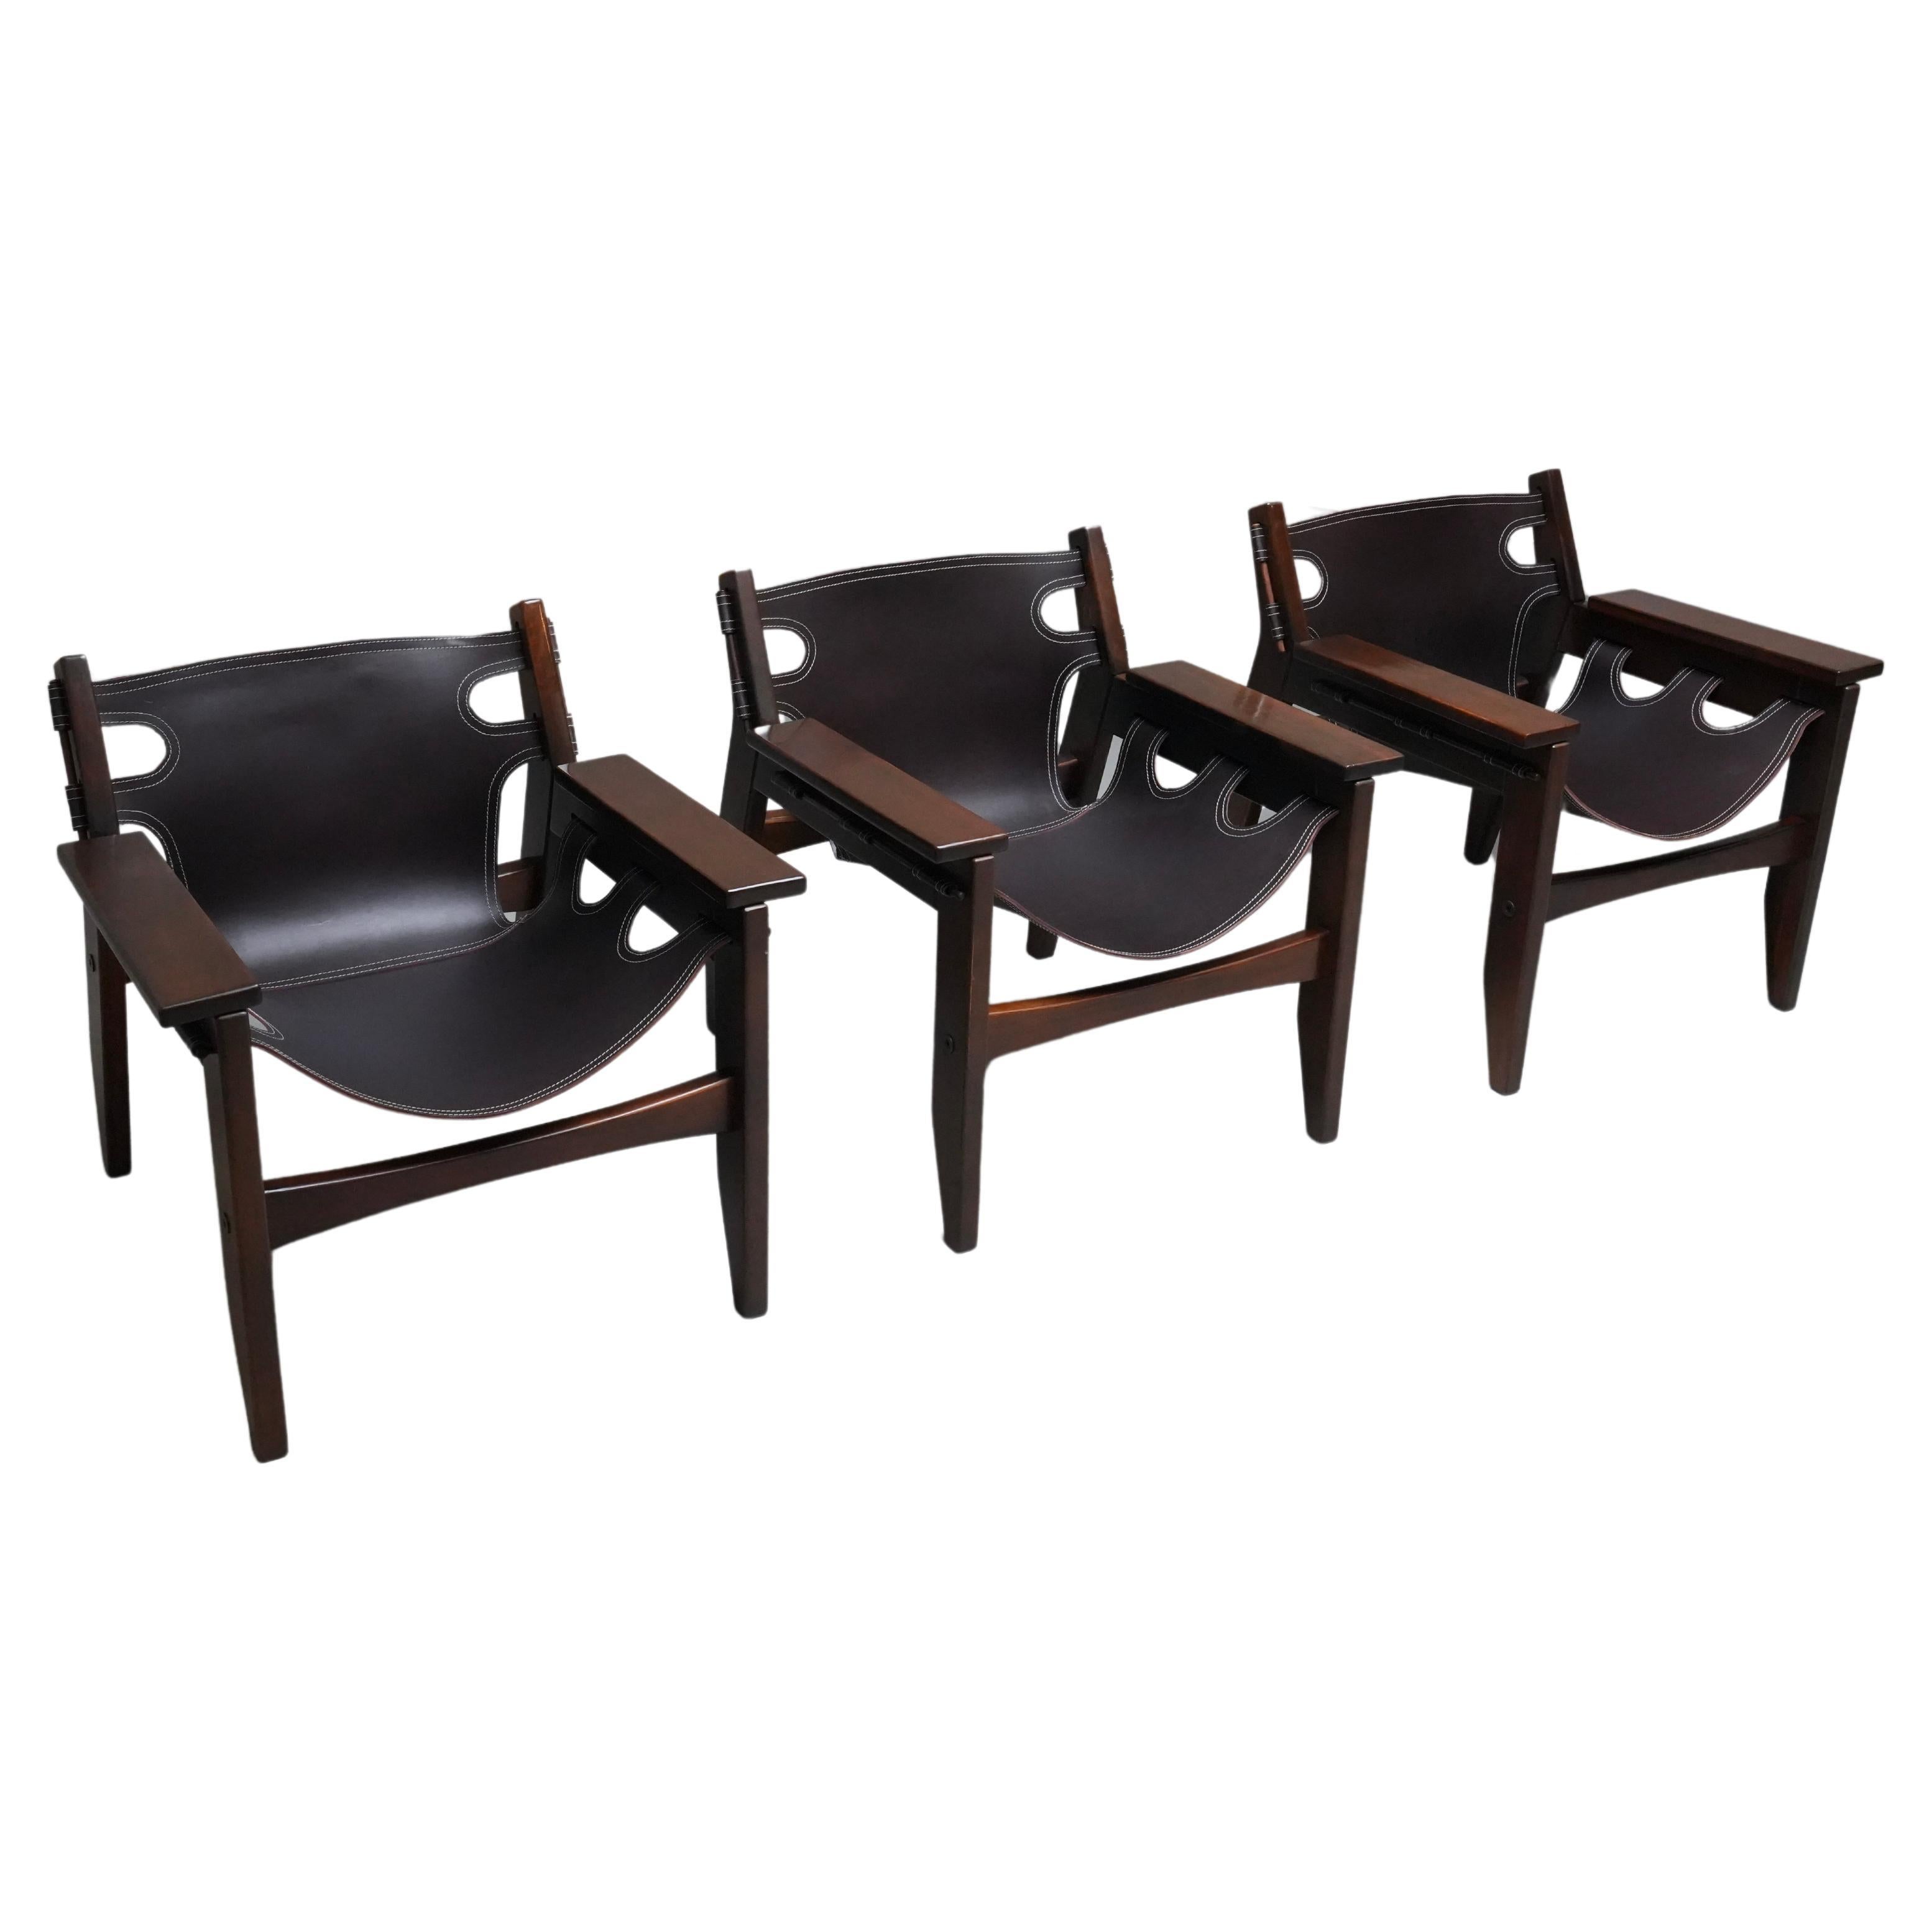 Set of Three Sergio Rodrigues ‘Kilin' Lounge Chairs, Brasil, 1970s For Sale